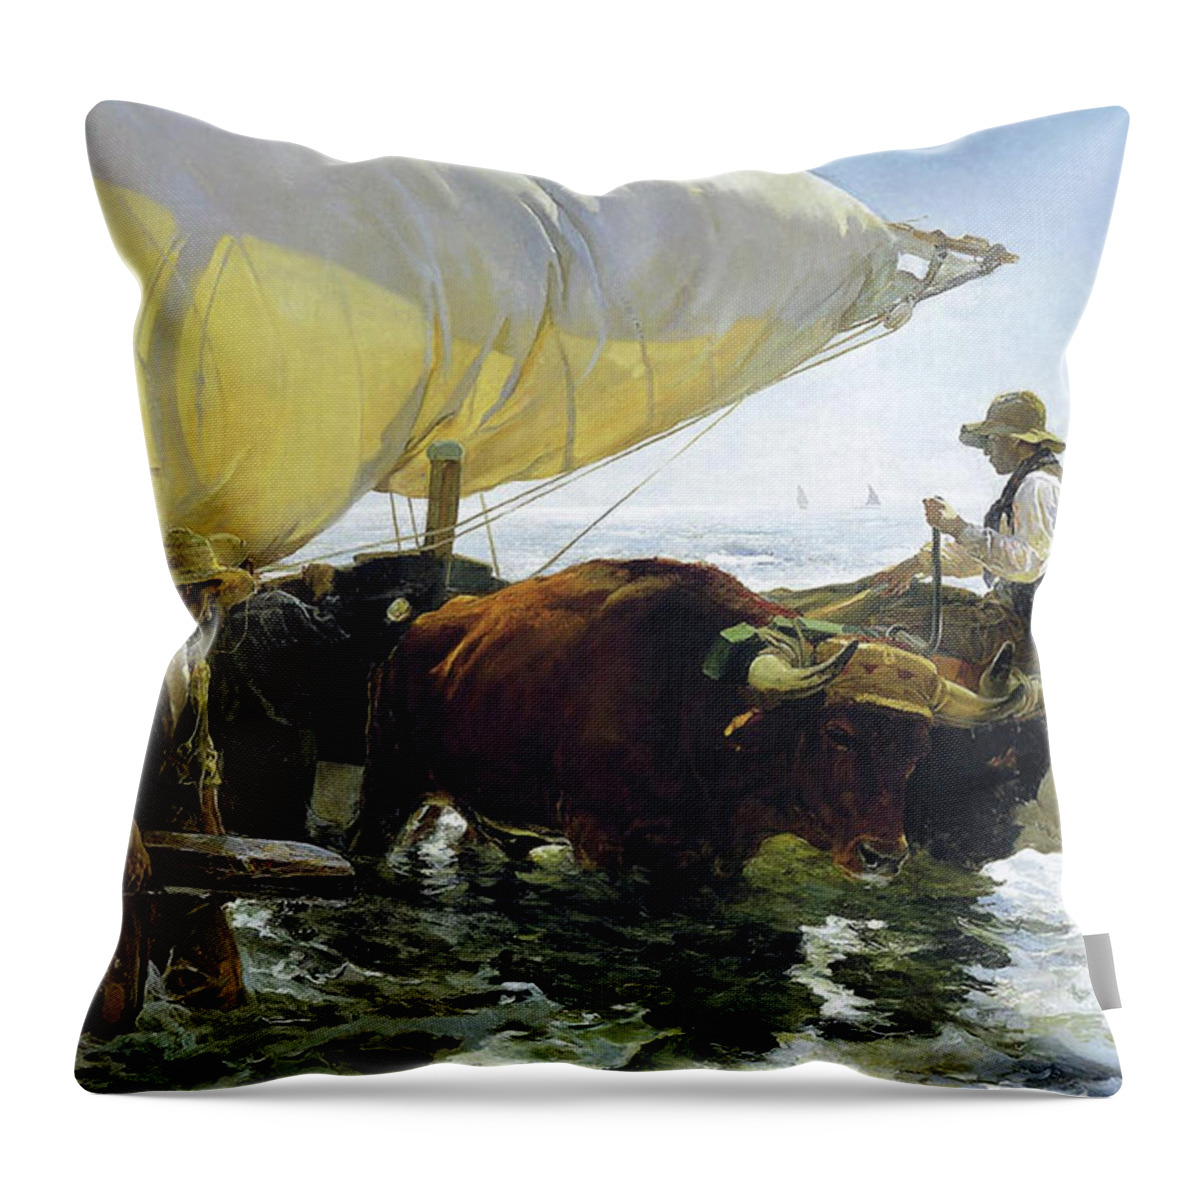 Return From Fishing Of 1905 Throw Pillow featuring the painting The Return from Fishing of 1905 by Juaquin Sorolla